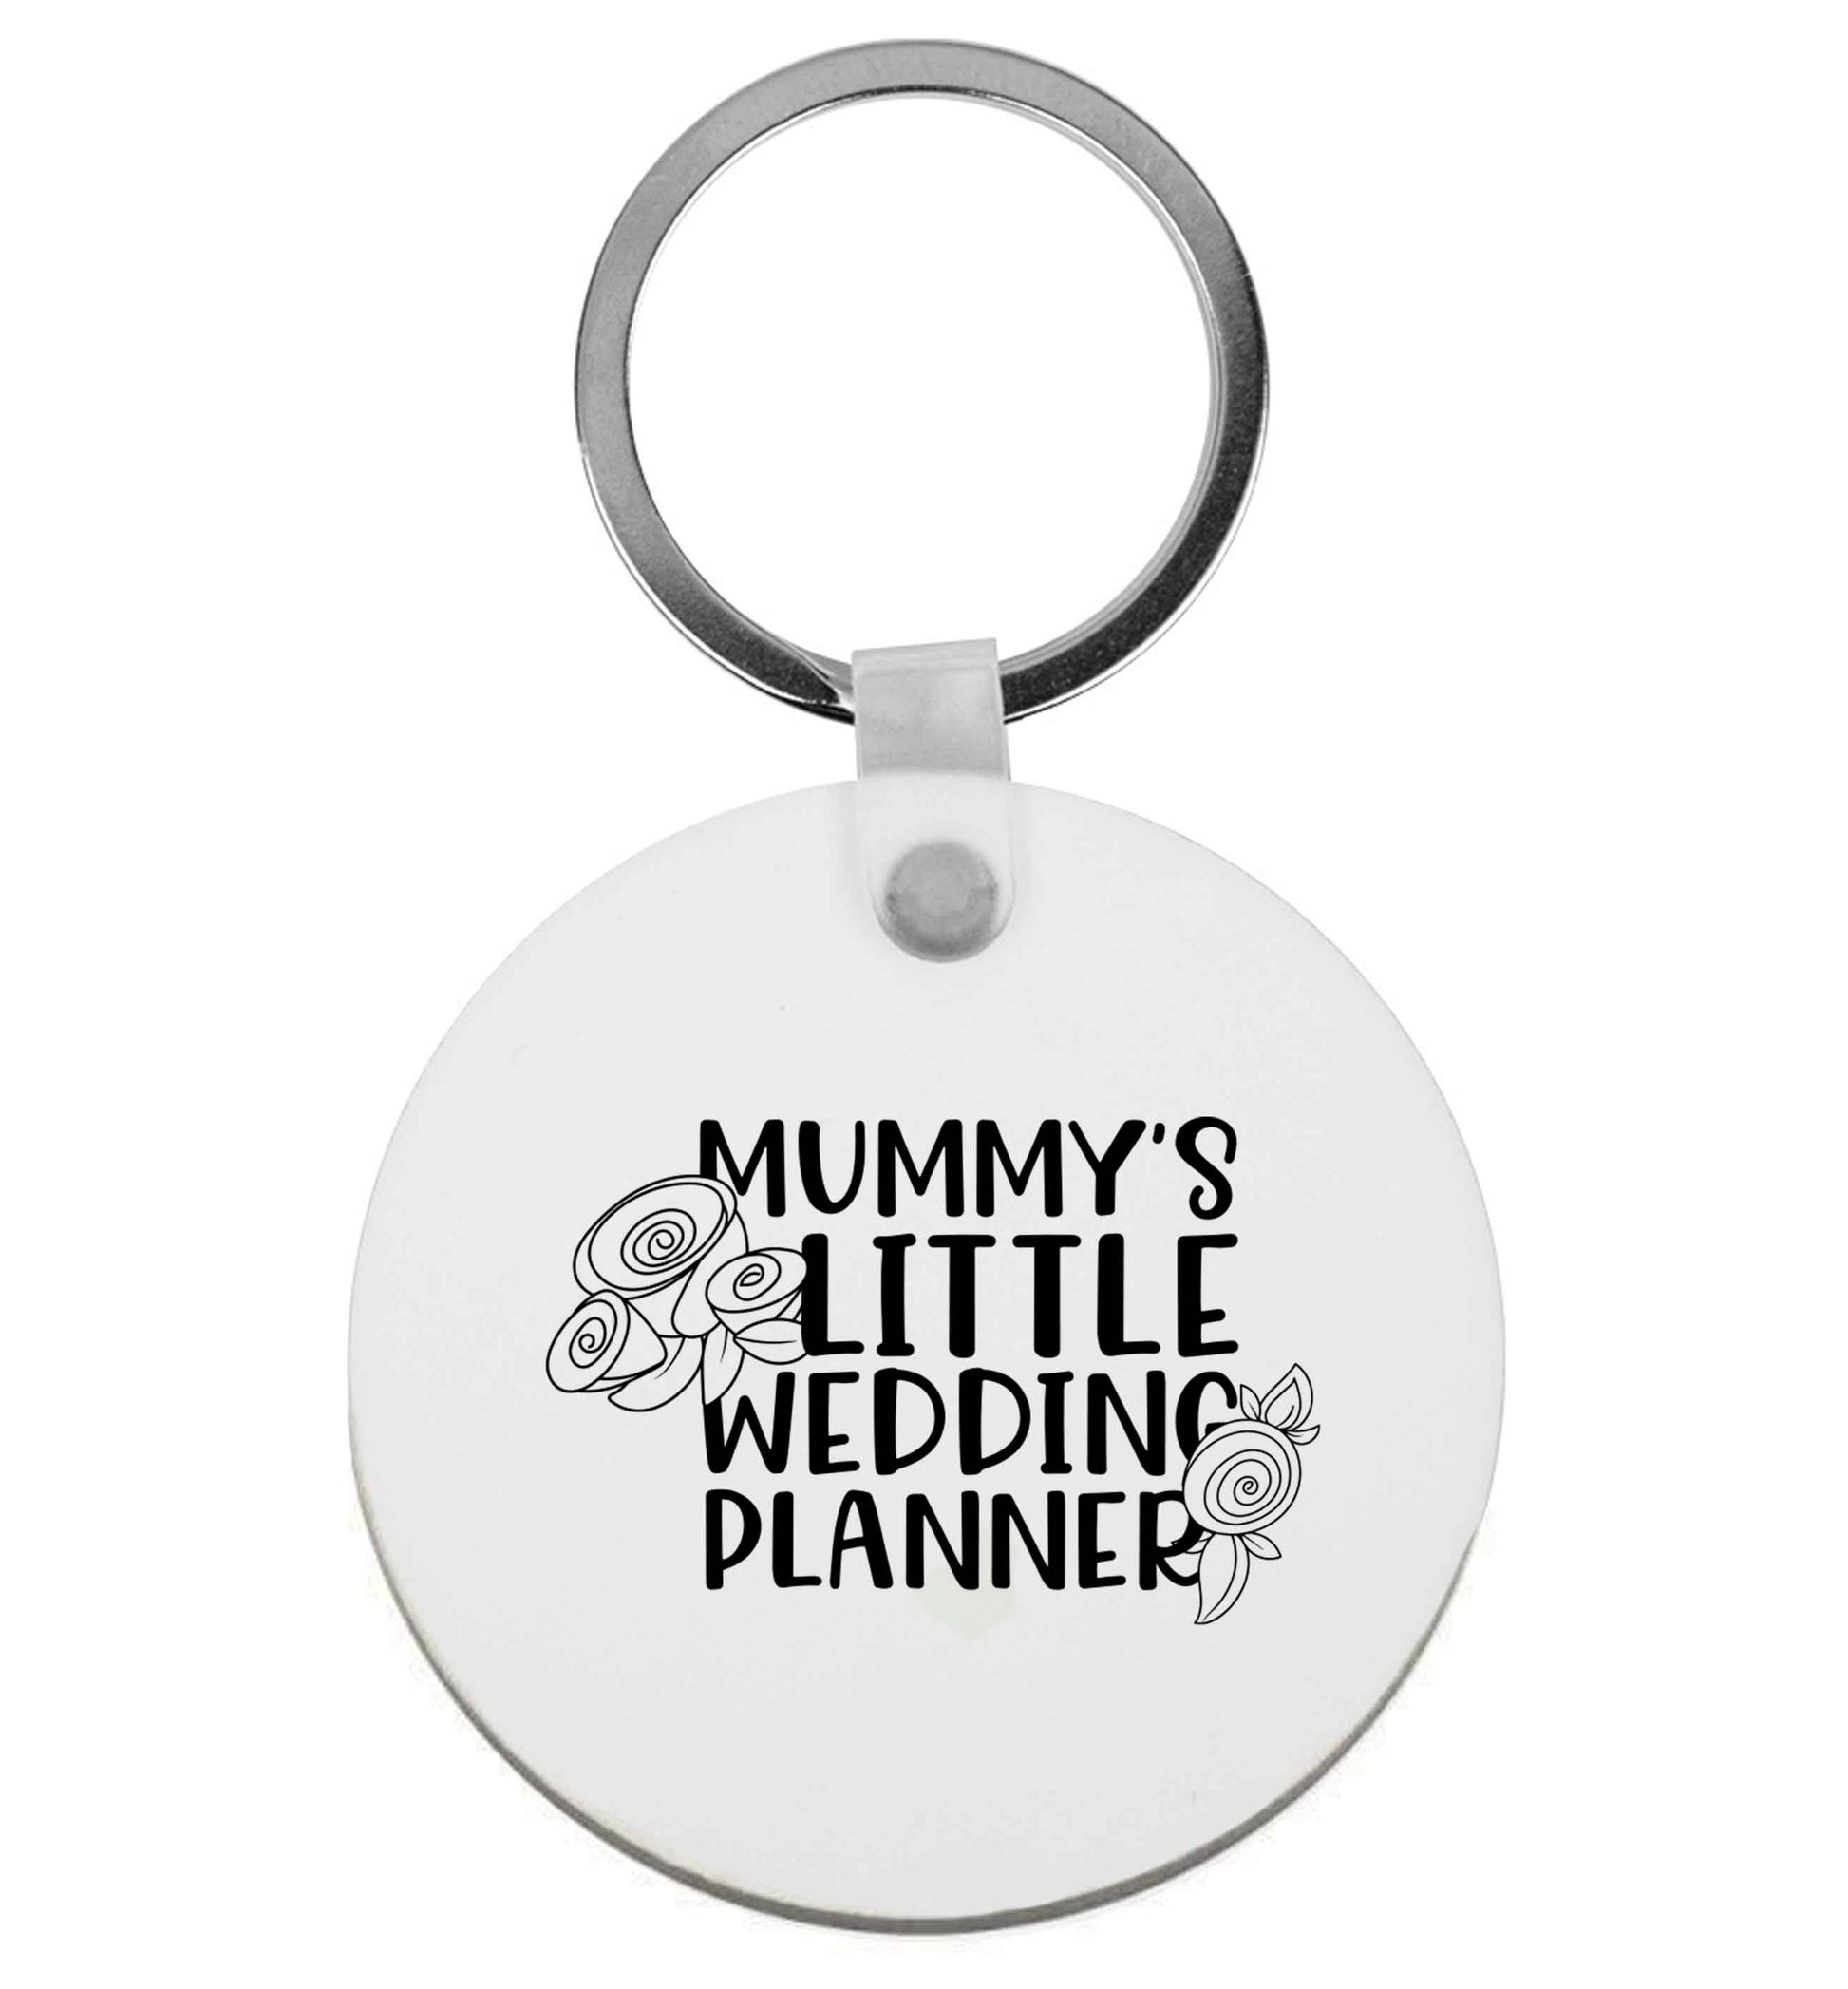 adorable wedding themed gifts for your mini wedding planner! | Keyring